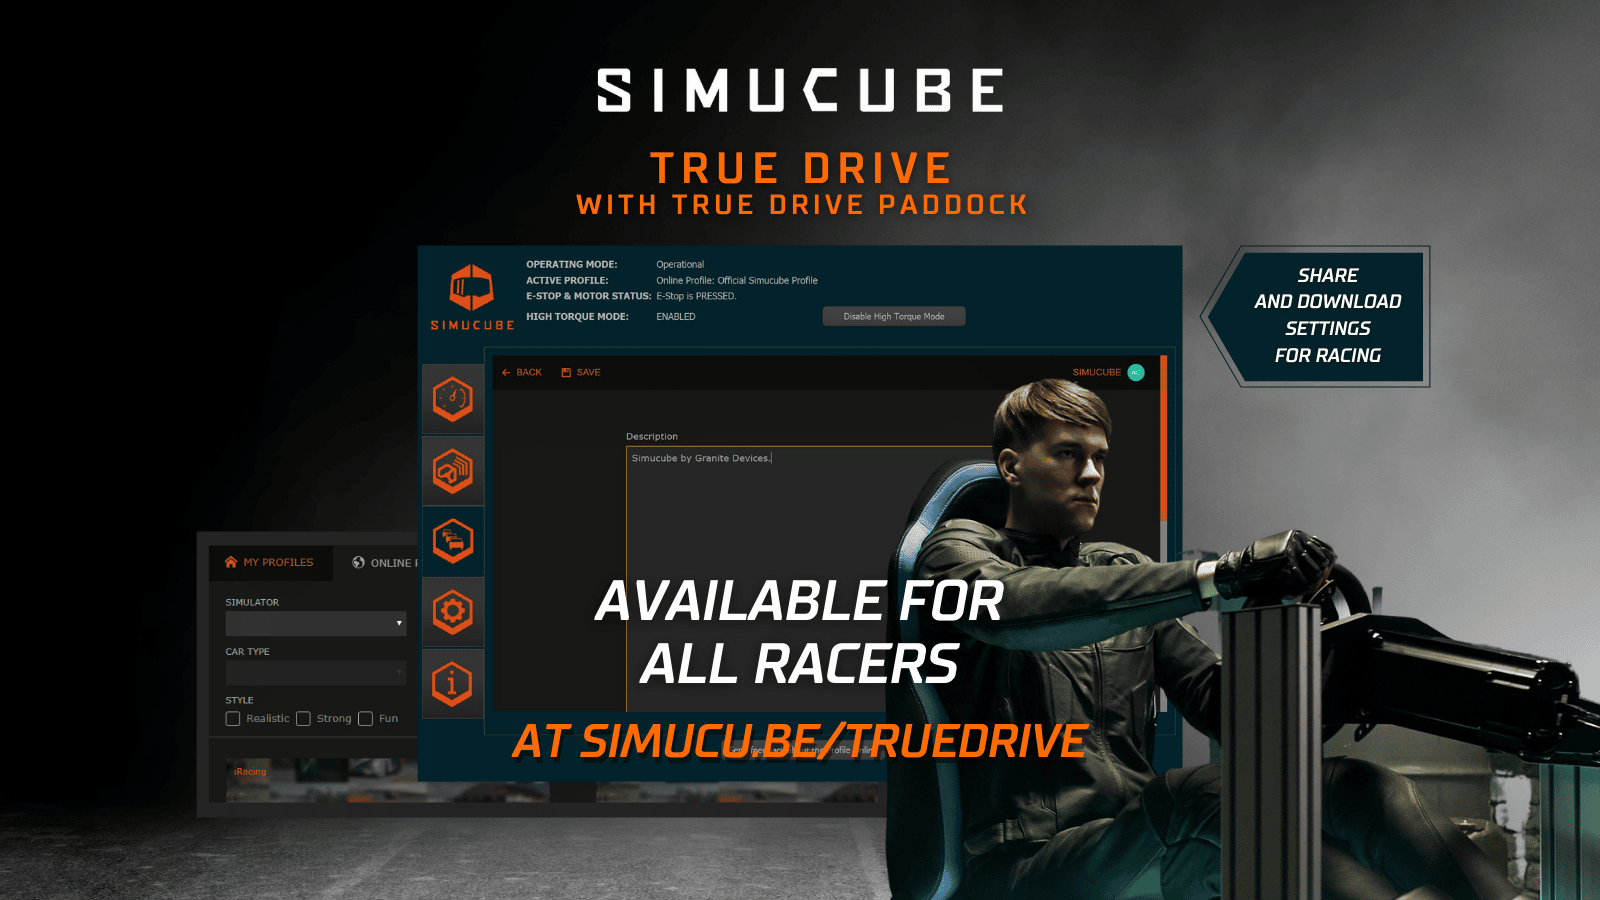 Simucube 2 True Drive Software with True Drive Paddock -feature is available for all Simucube 2 racers.